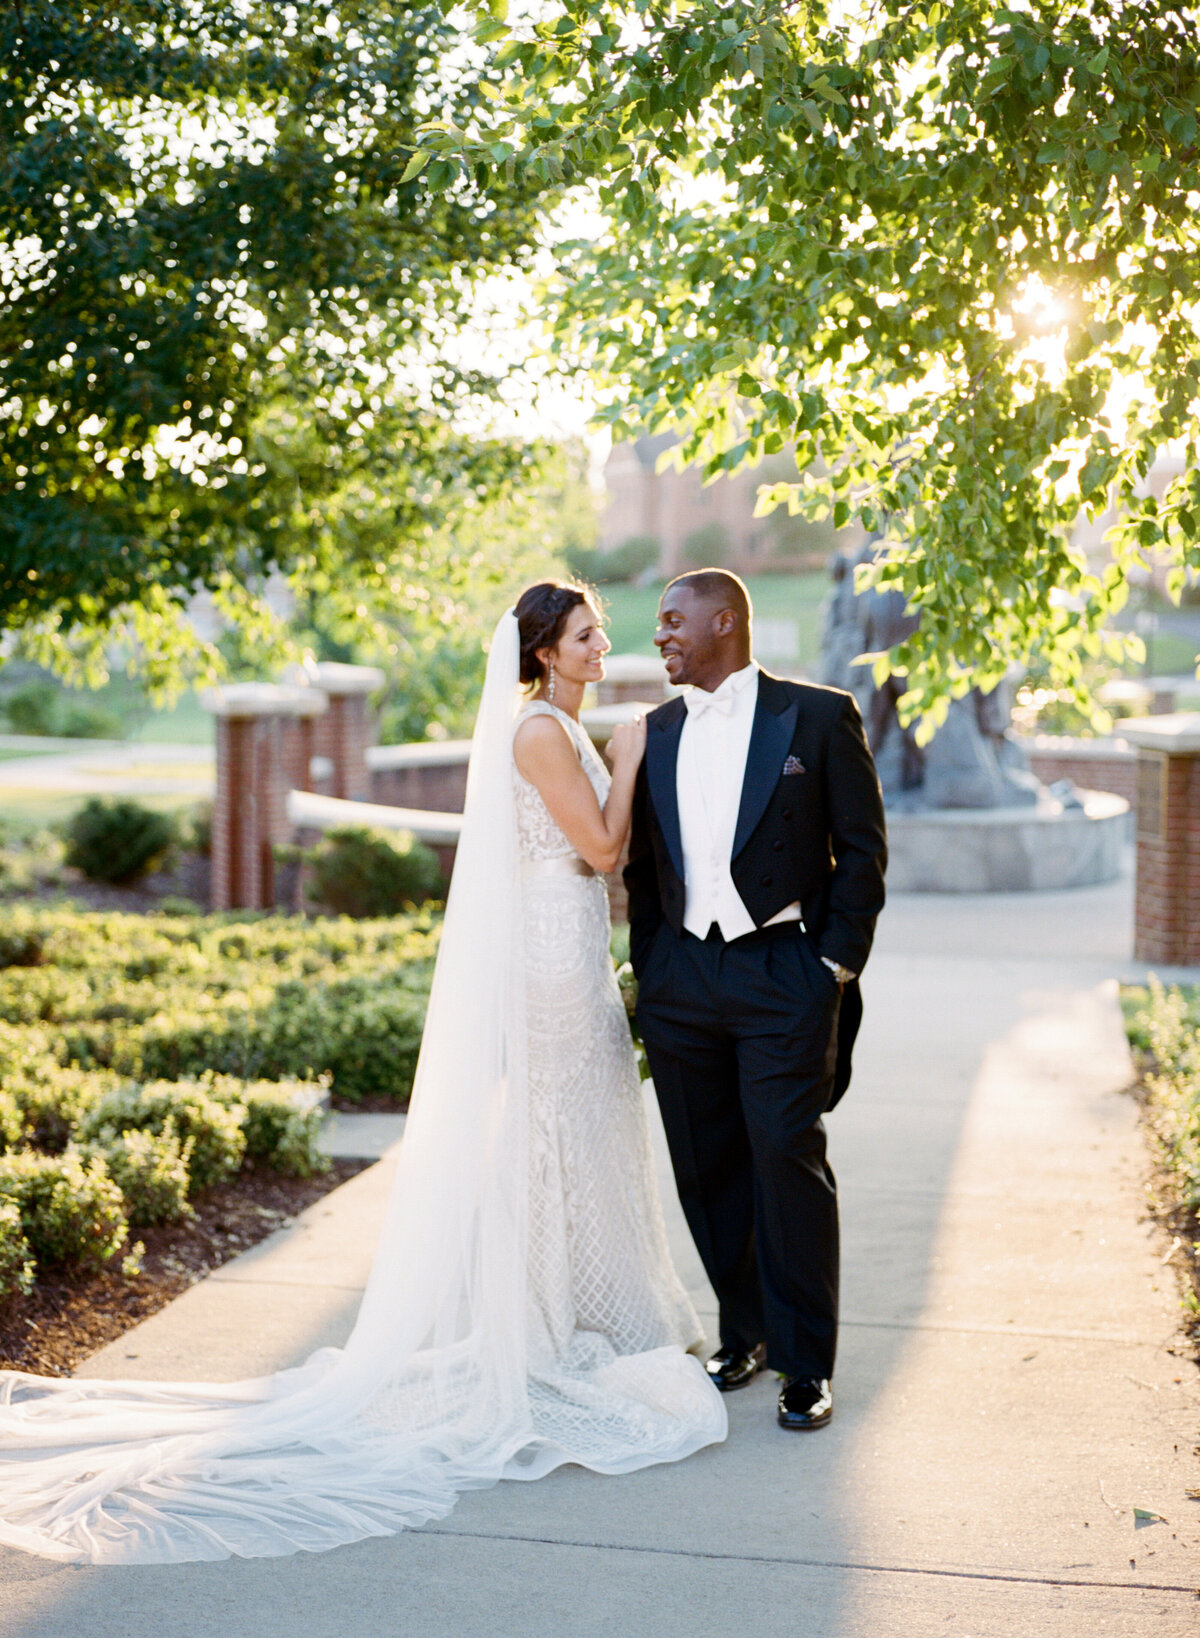 image of bride and groom admiring each other outdoors